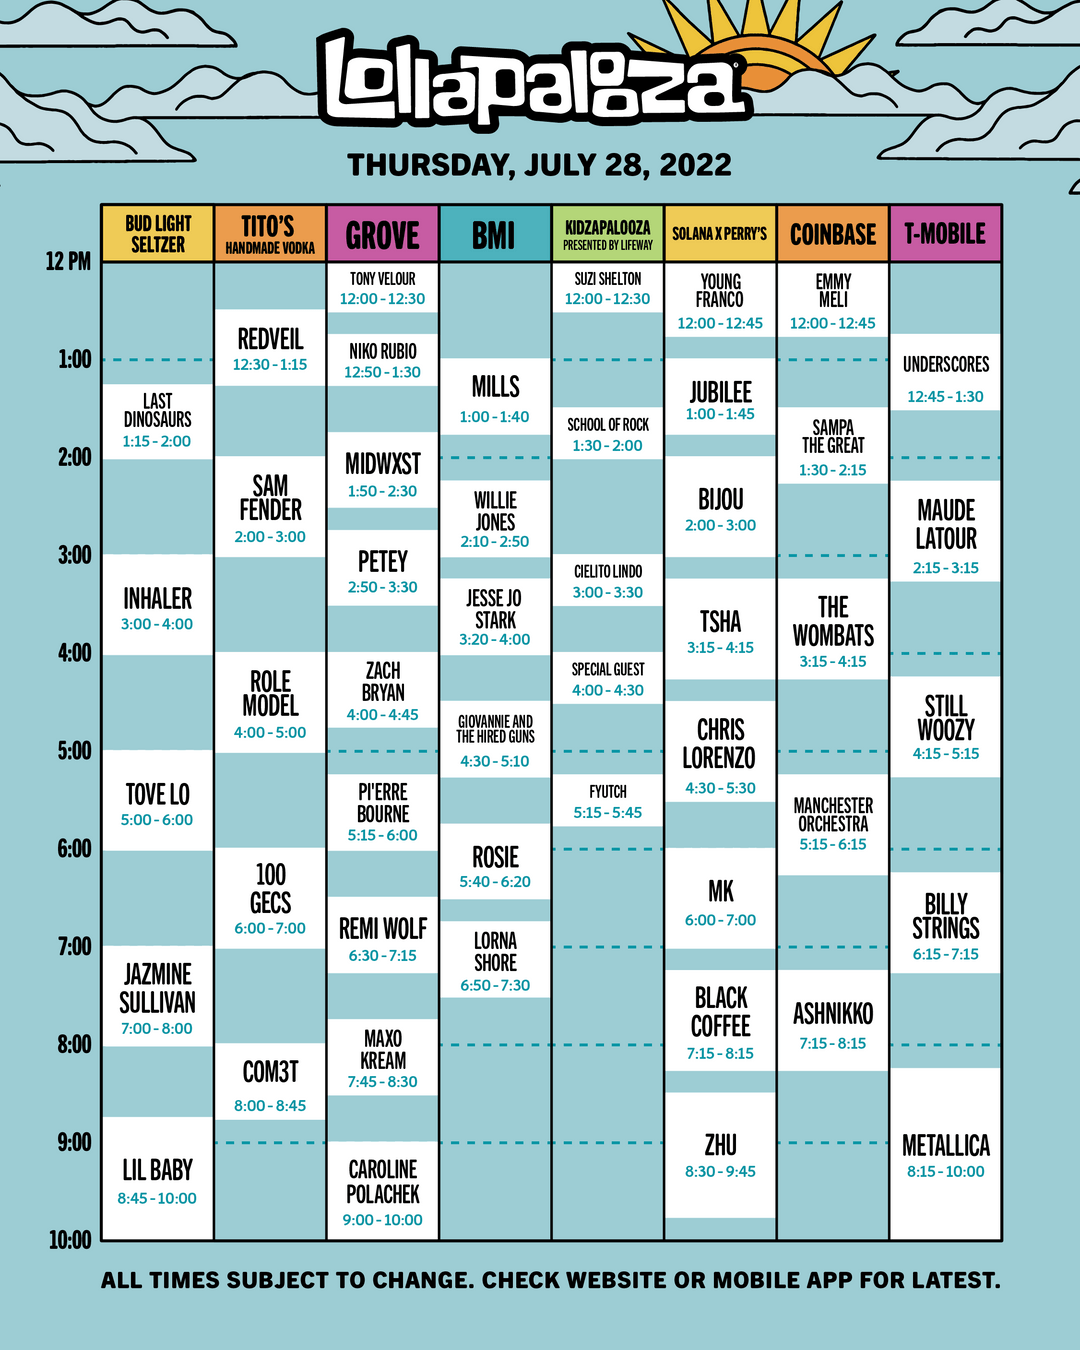 2022 Lollapalooza Schedule Announced 1